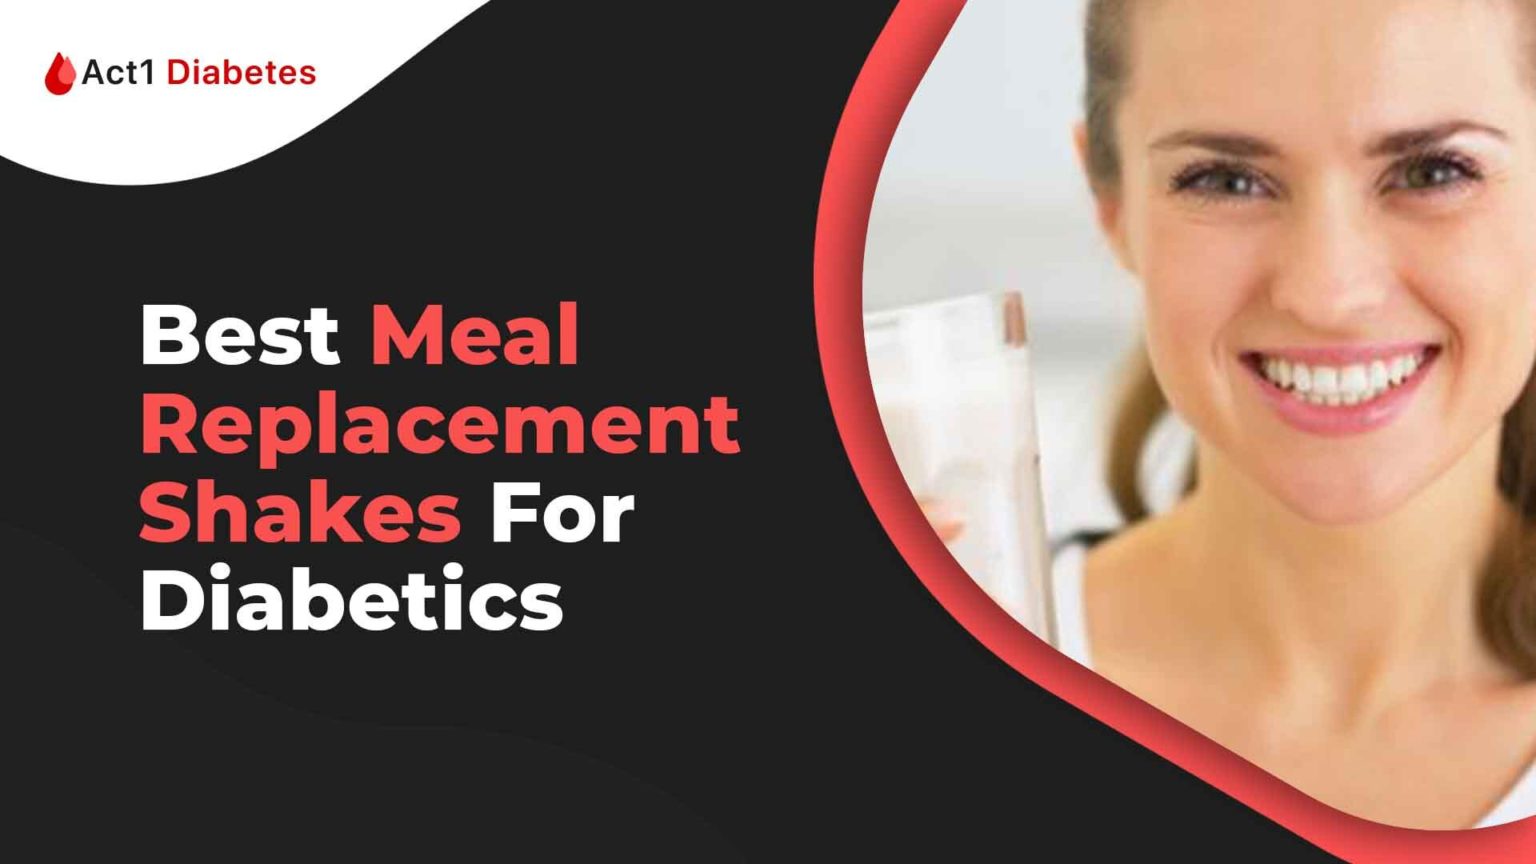 Best Meal Replacement Shakes For Diabetics In 2021!